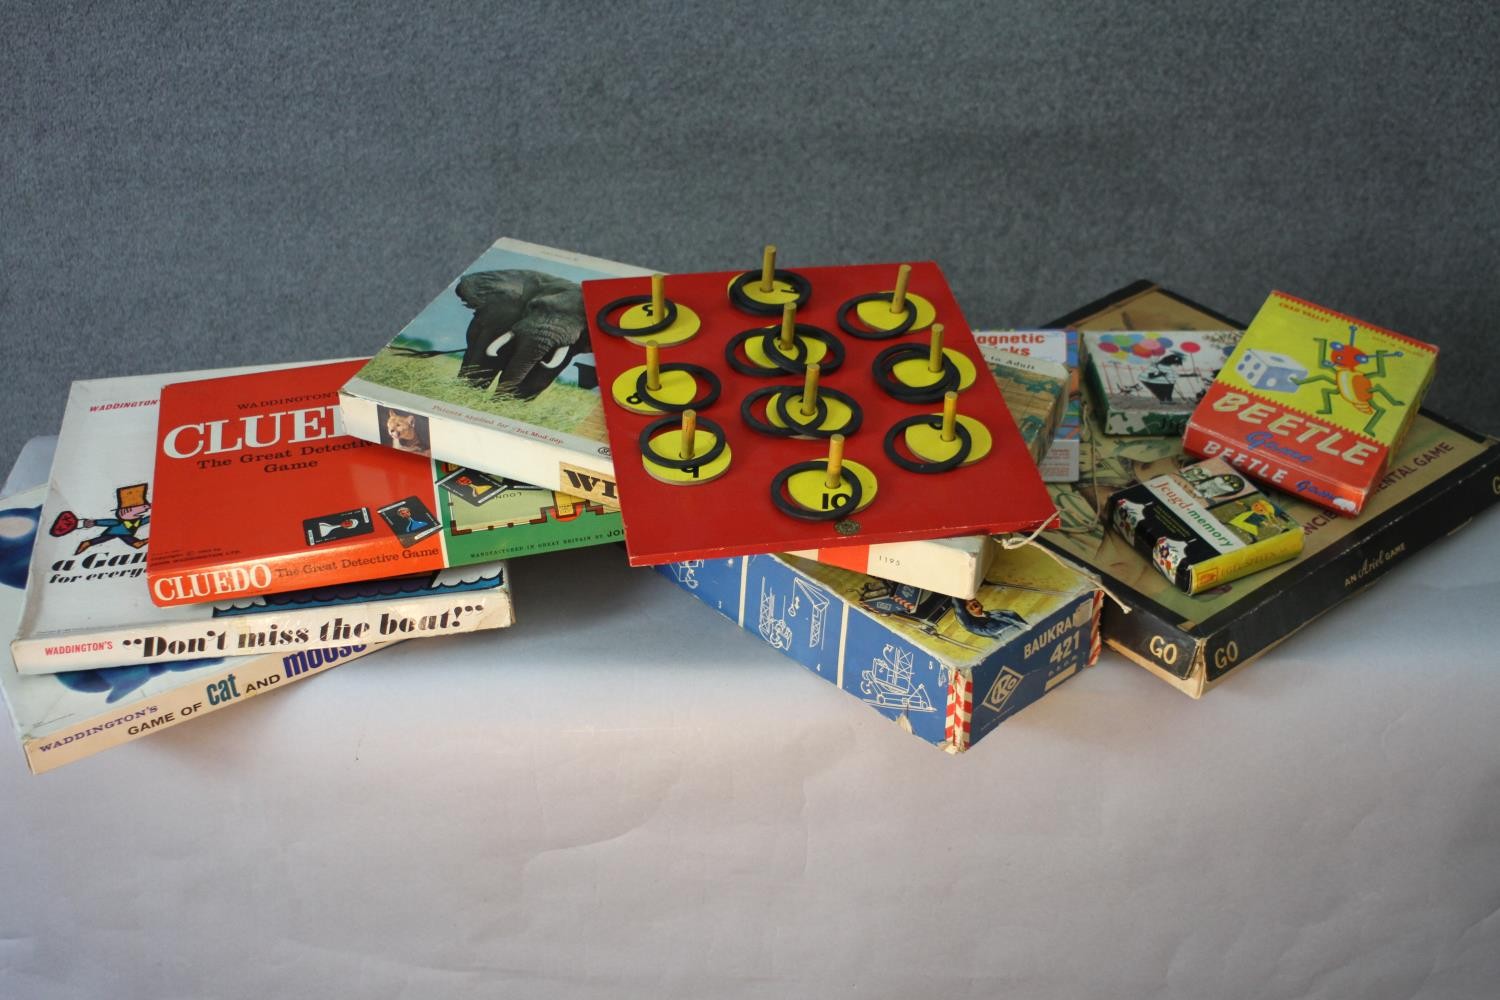 A collection of vintage toys and games. Including Cluedo, Beetle, Dont Miss the Boat, Go and a